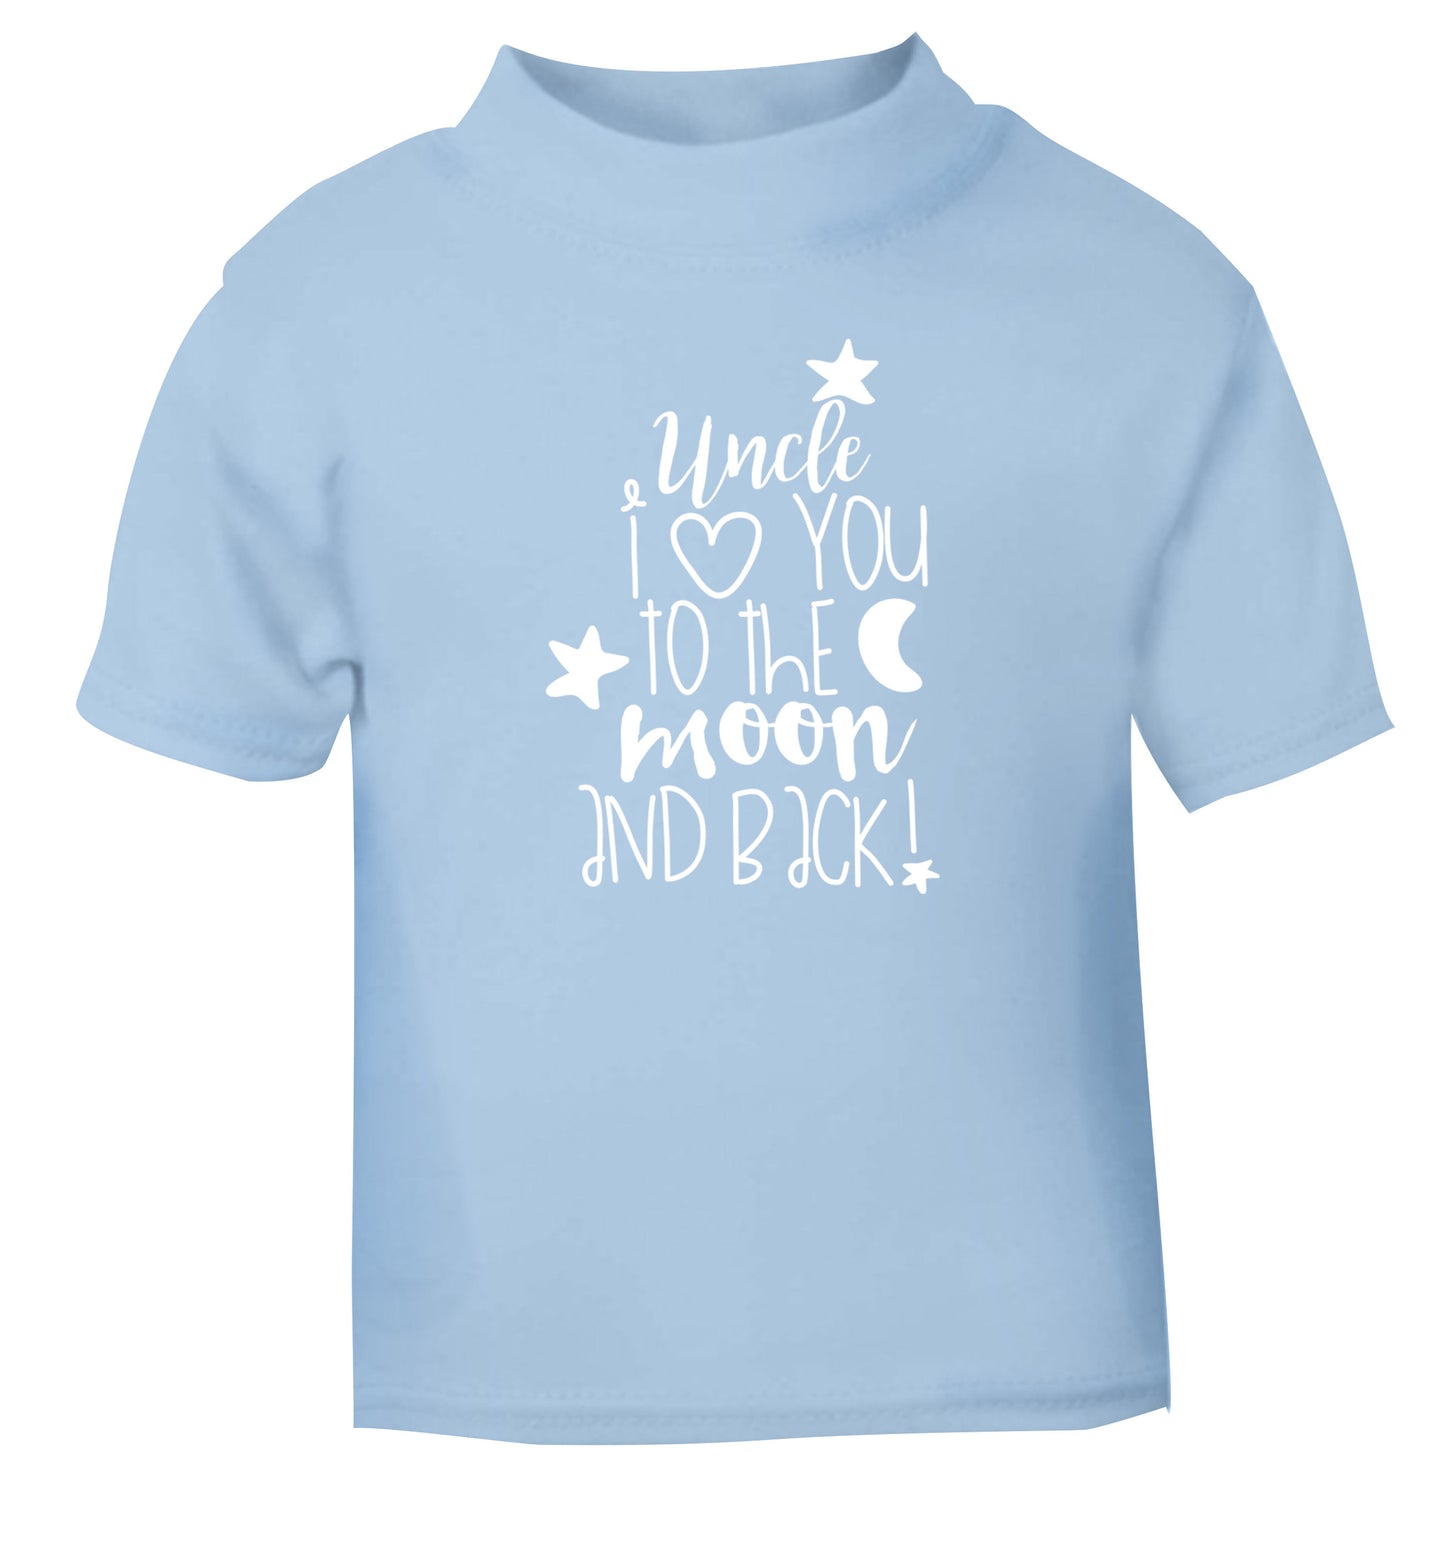 Uncle I love you to the moon and back light blue Baby Toddler Tshirt 2 Years